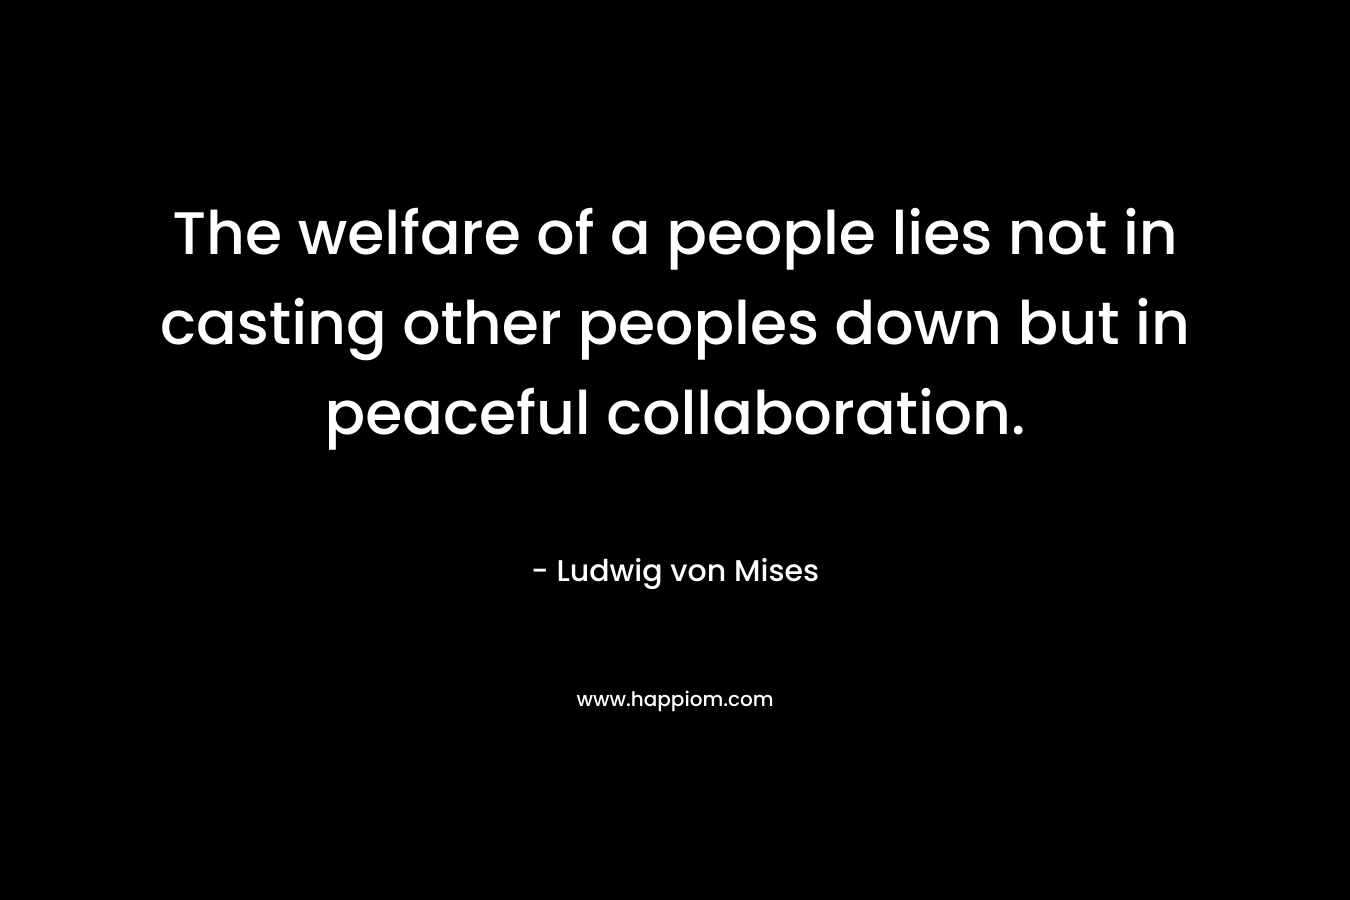 The welfare of a people lies not in casting other peoples down but in peaceful collaboration.